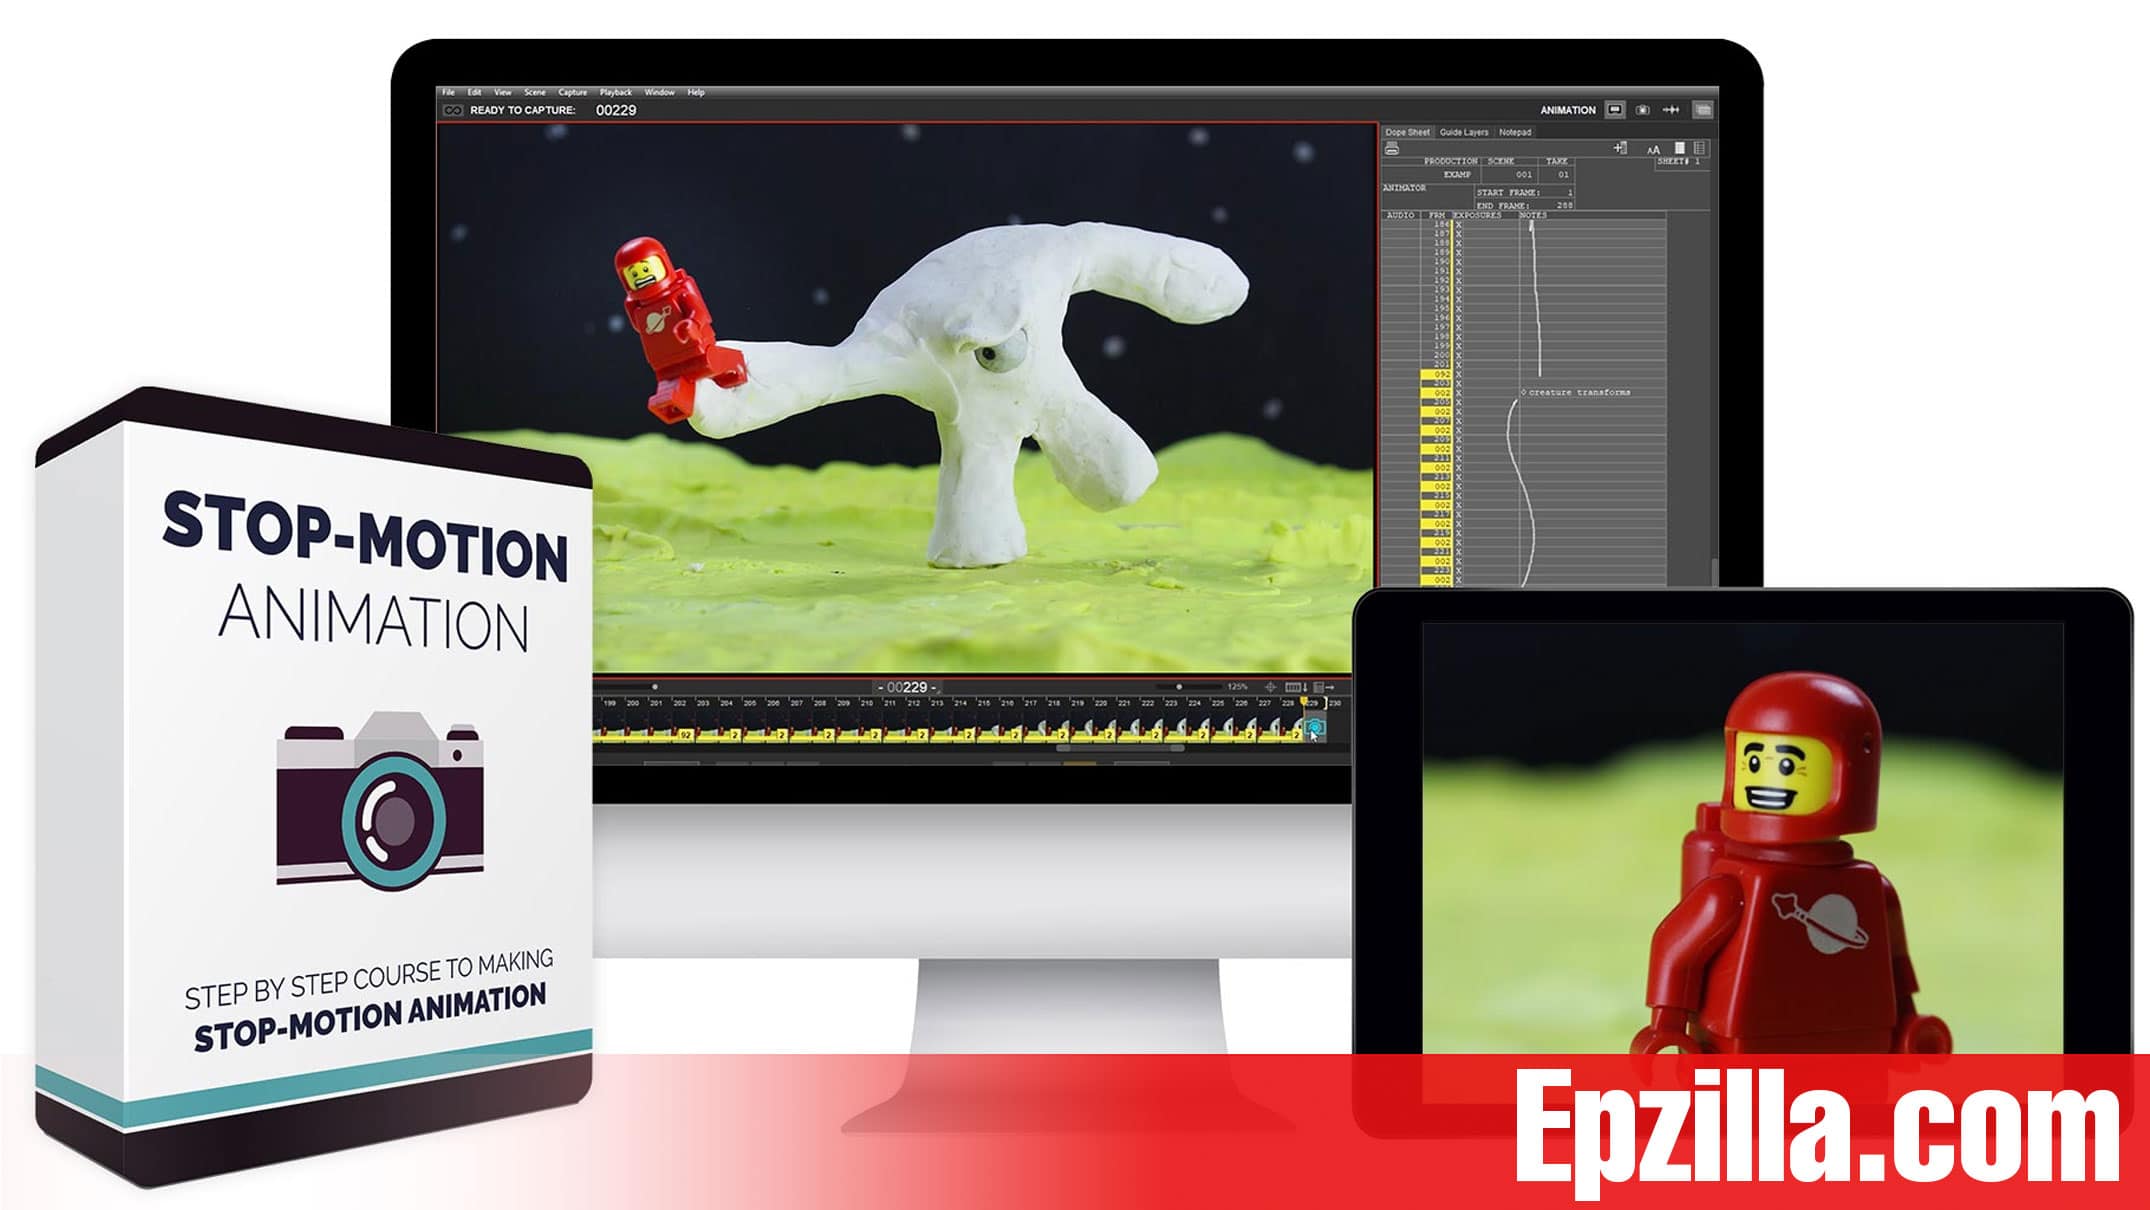 Bloop Animations Stop Motion Animation Free Download Epzilla.com